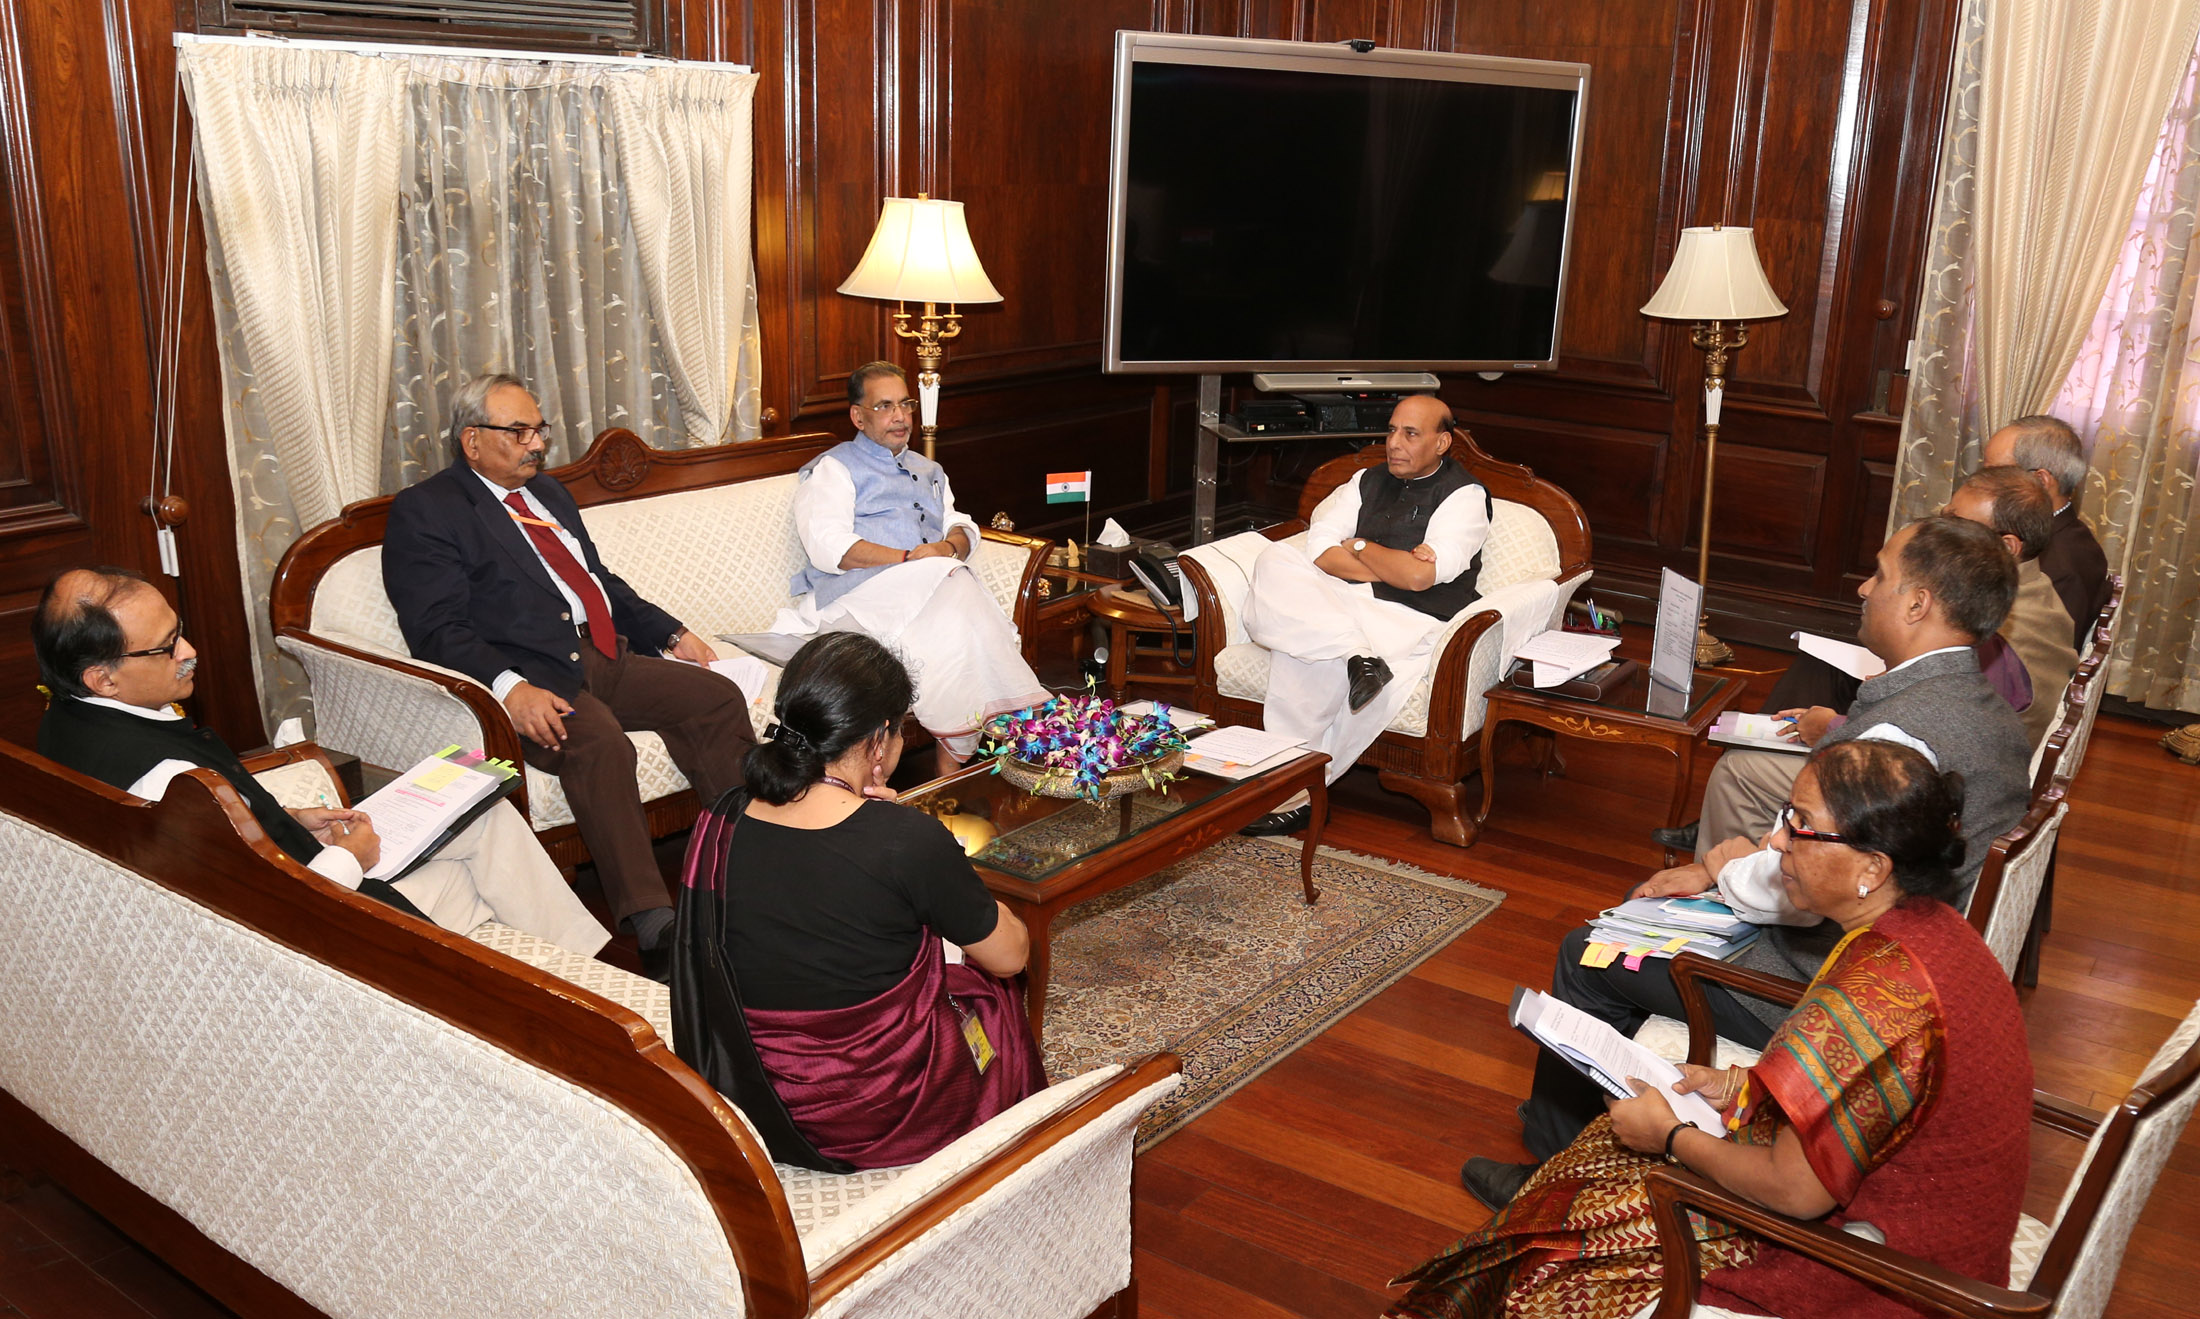 The Union Home Minister, Shri Rajnath Singh chairing a meeting of the High Level Committee (HLC) for Central Assistance to Uttarakhand affected by drought, in New Delhi on November 17, 2016.  The Union Minister for Agriculture and Farmers Welfare, Shri Radha Mohan Singh, the Union Home Secretary, Shri Rajiv Mehrishi and senior officers of the Ministries of Home, Finance and Agriculture are also seen.